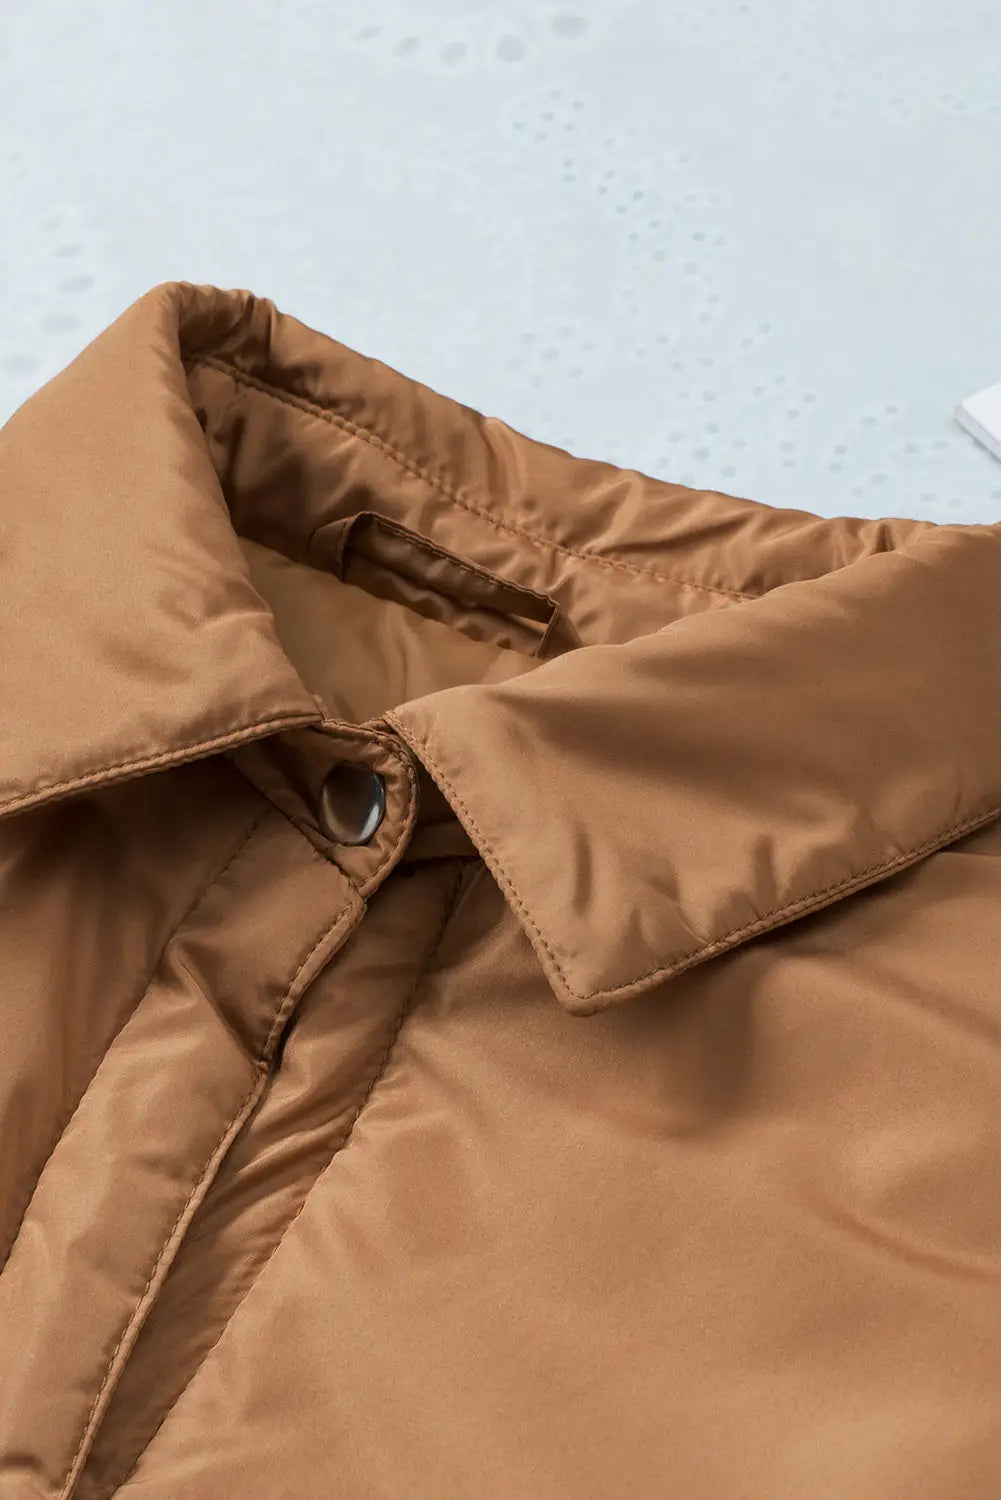 Brown button down padded jacket with pockets - outerwear